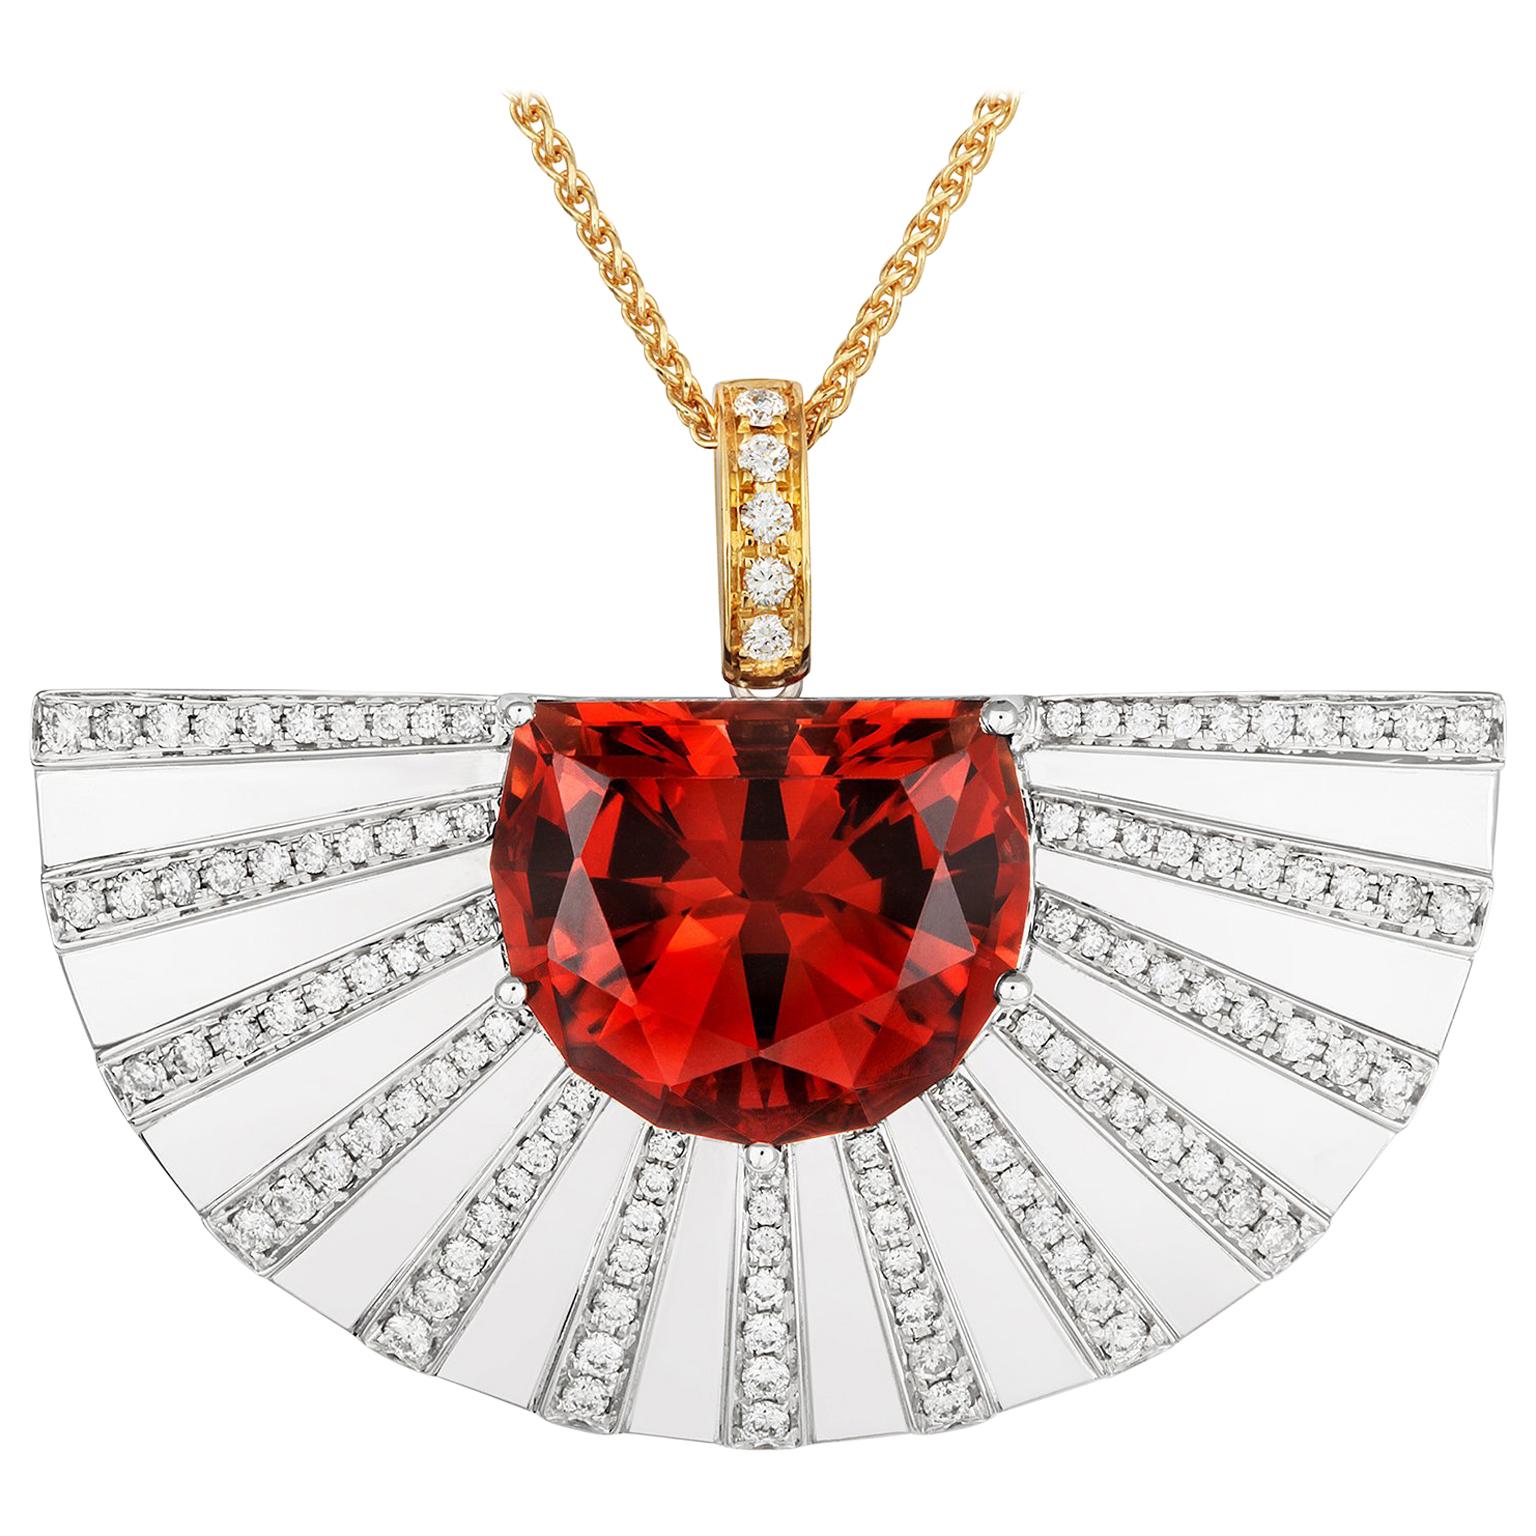 Tivon 18 Carat White and Yellow Gold Fancy-Cut Tourmaline and Diamond Pendant For Sale